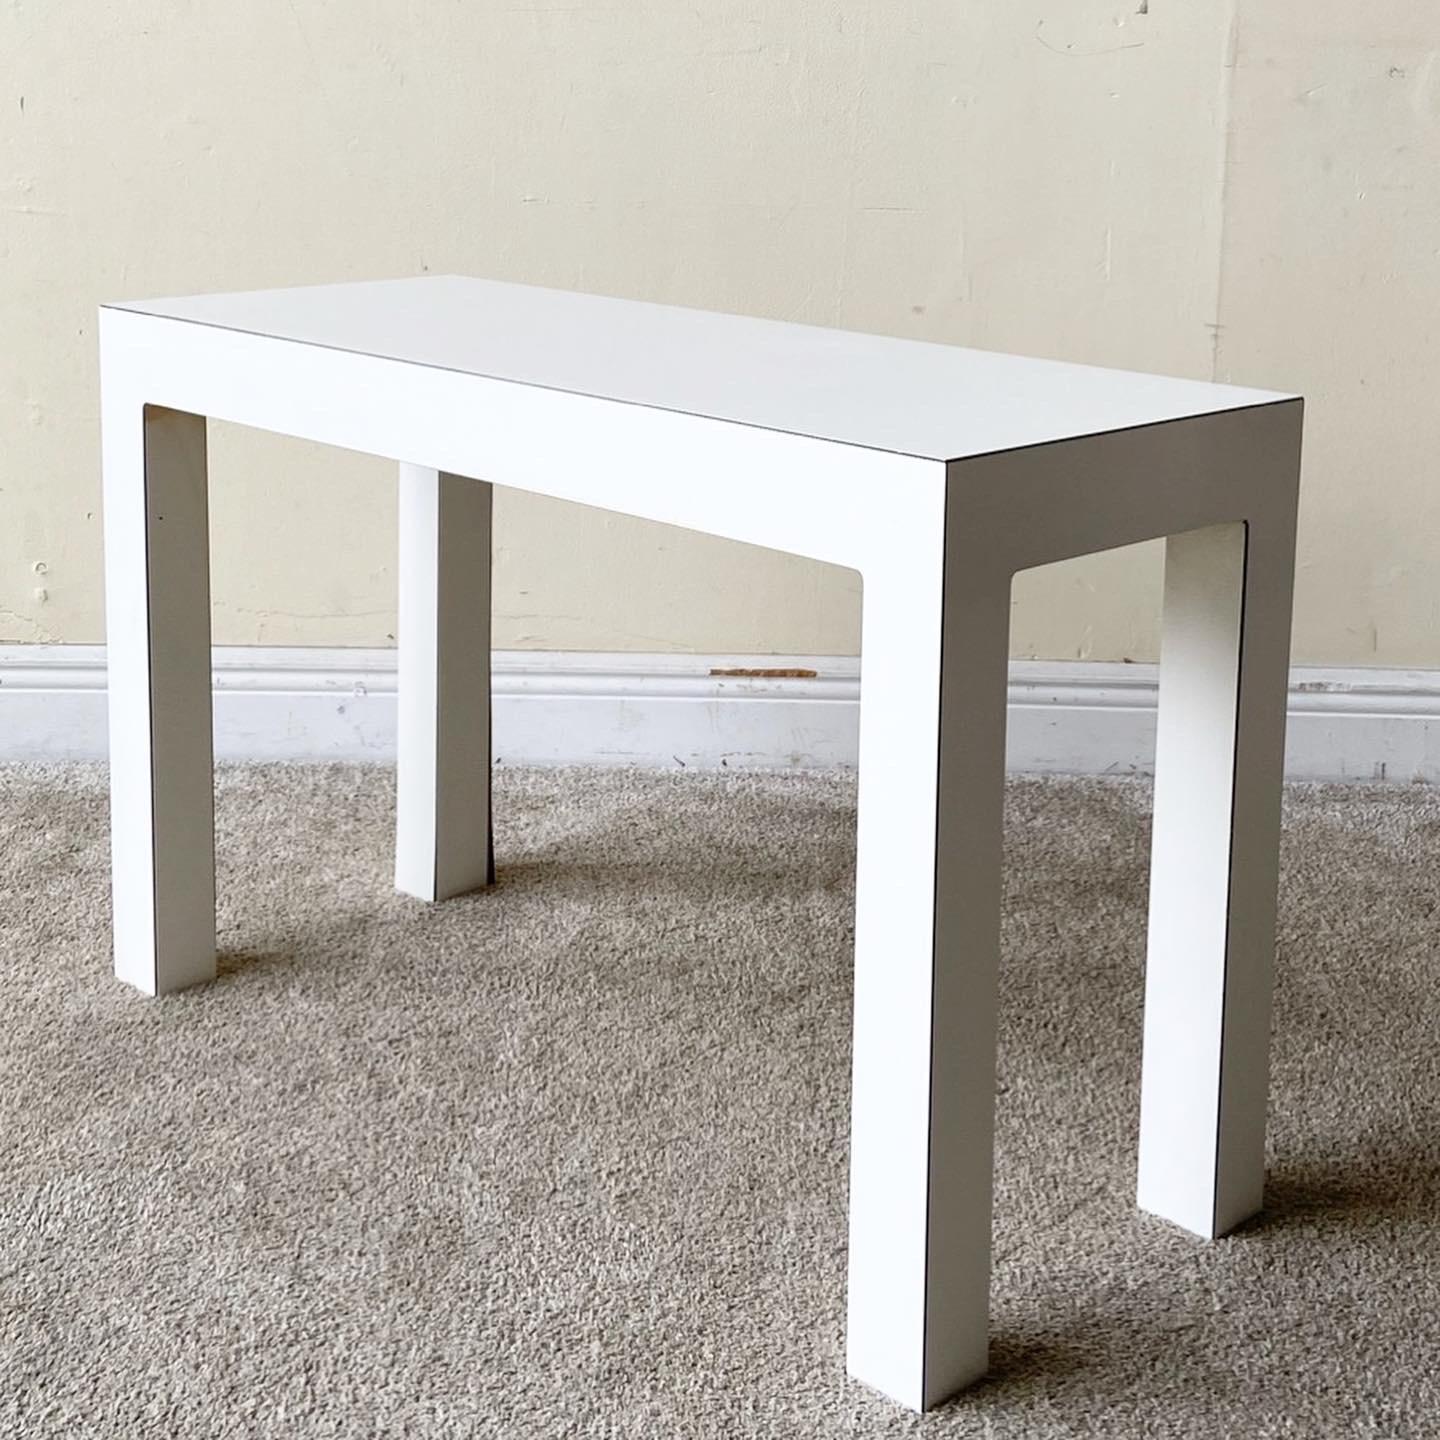 Incredible pair of postmodern rectangular side tables. Each features a white lacquer laminate.

Additional information:
Material: Wood
Color: White
Style: Postmodern
Time Period: 1980s
Place of origin: USA
Dimension: 34